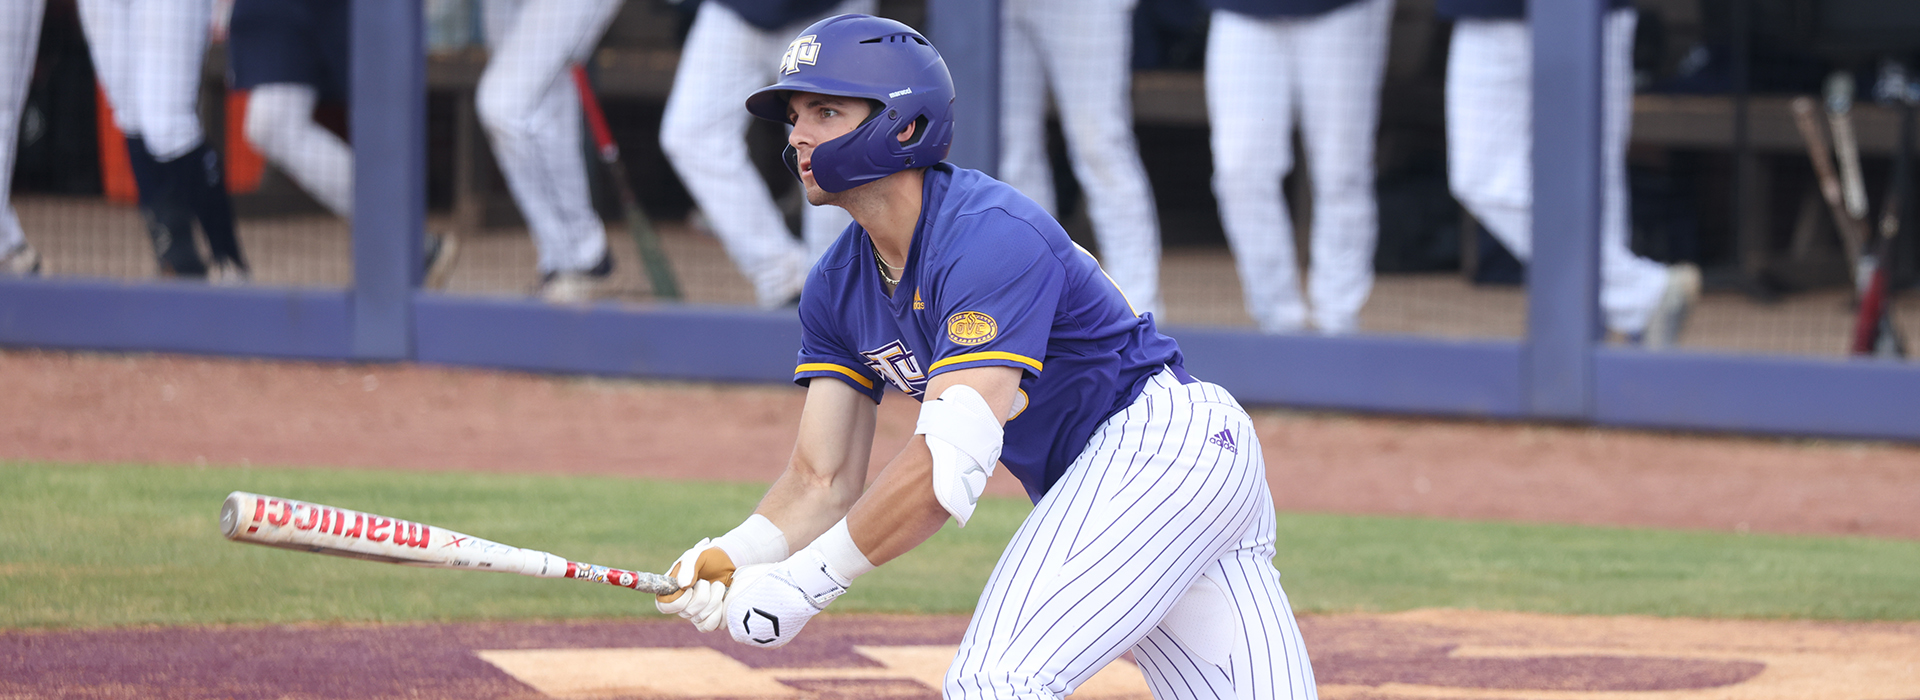 Golden Eagles take on SIUE in OVC series this weekend at the Quill